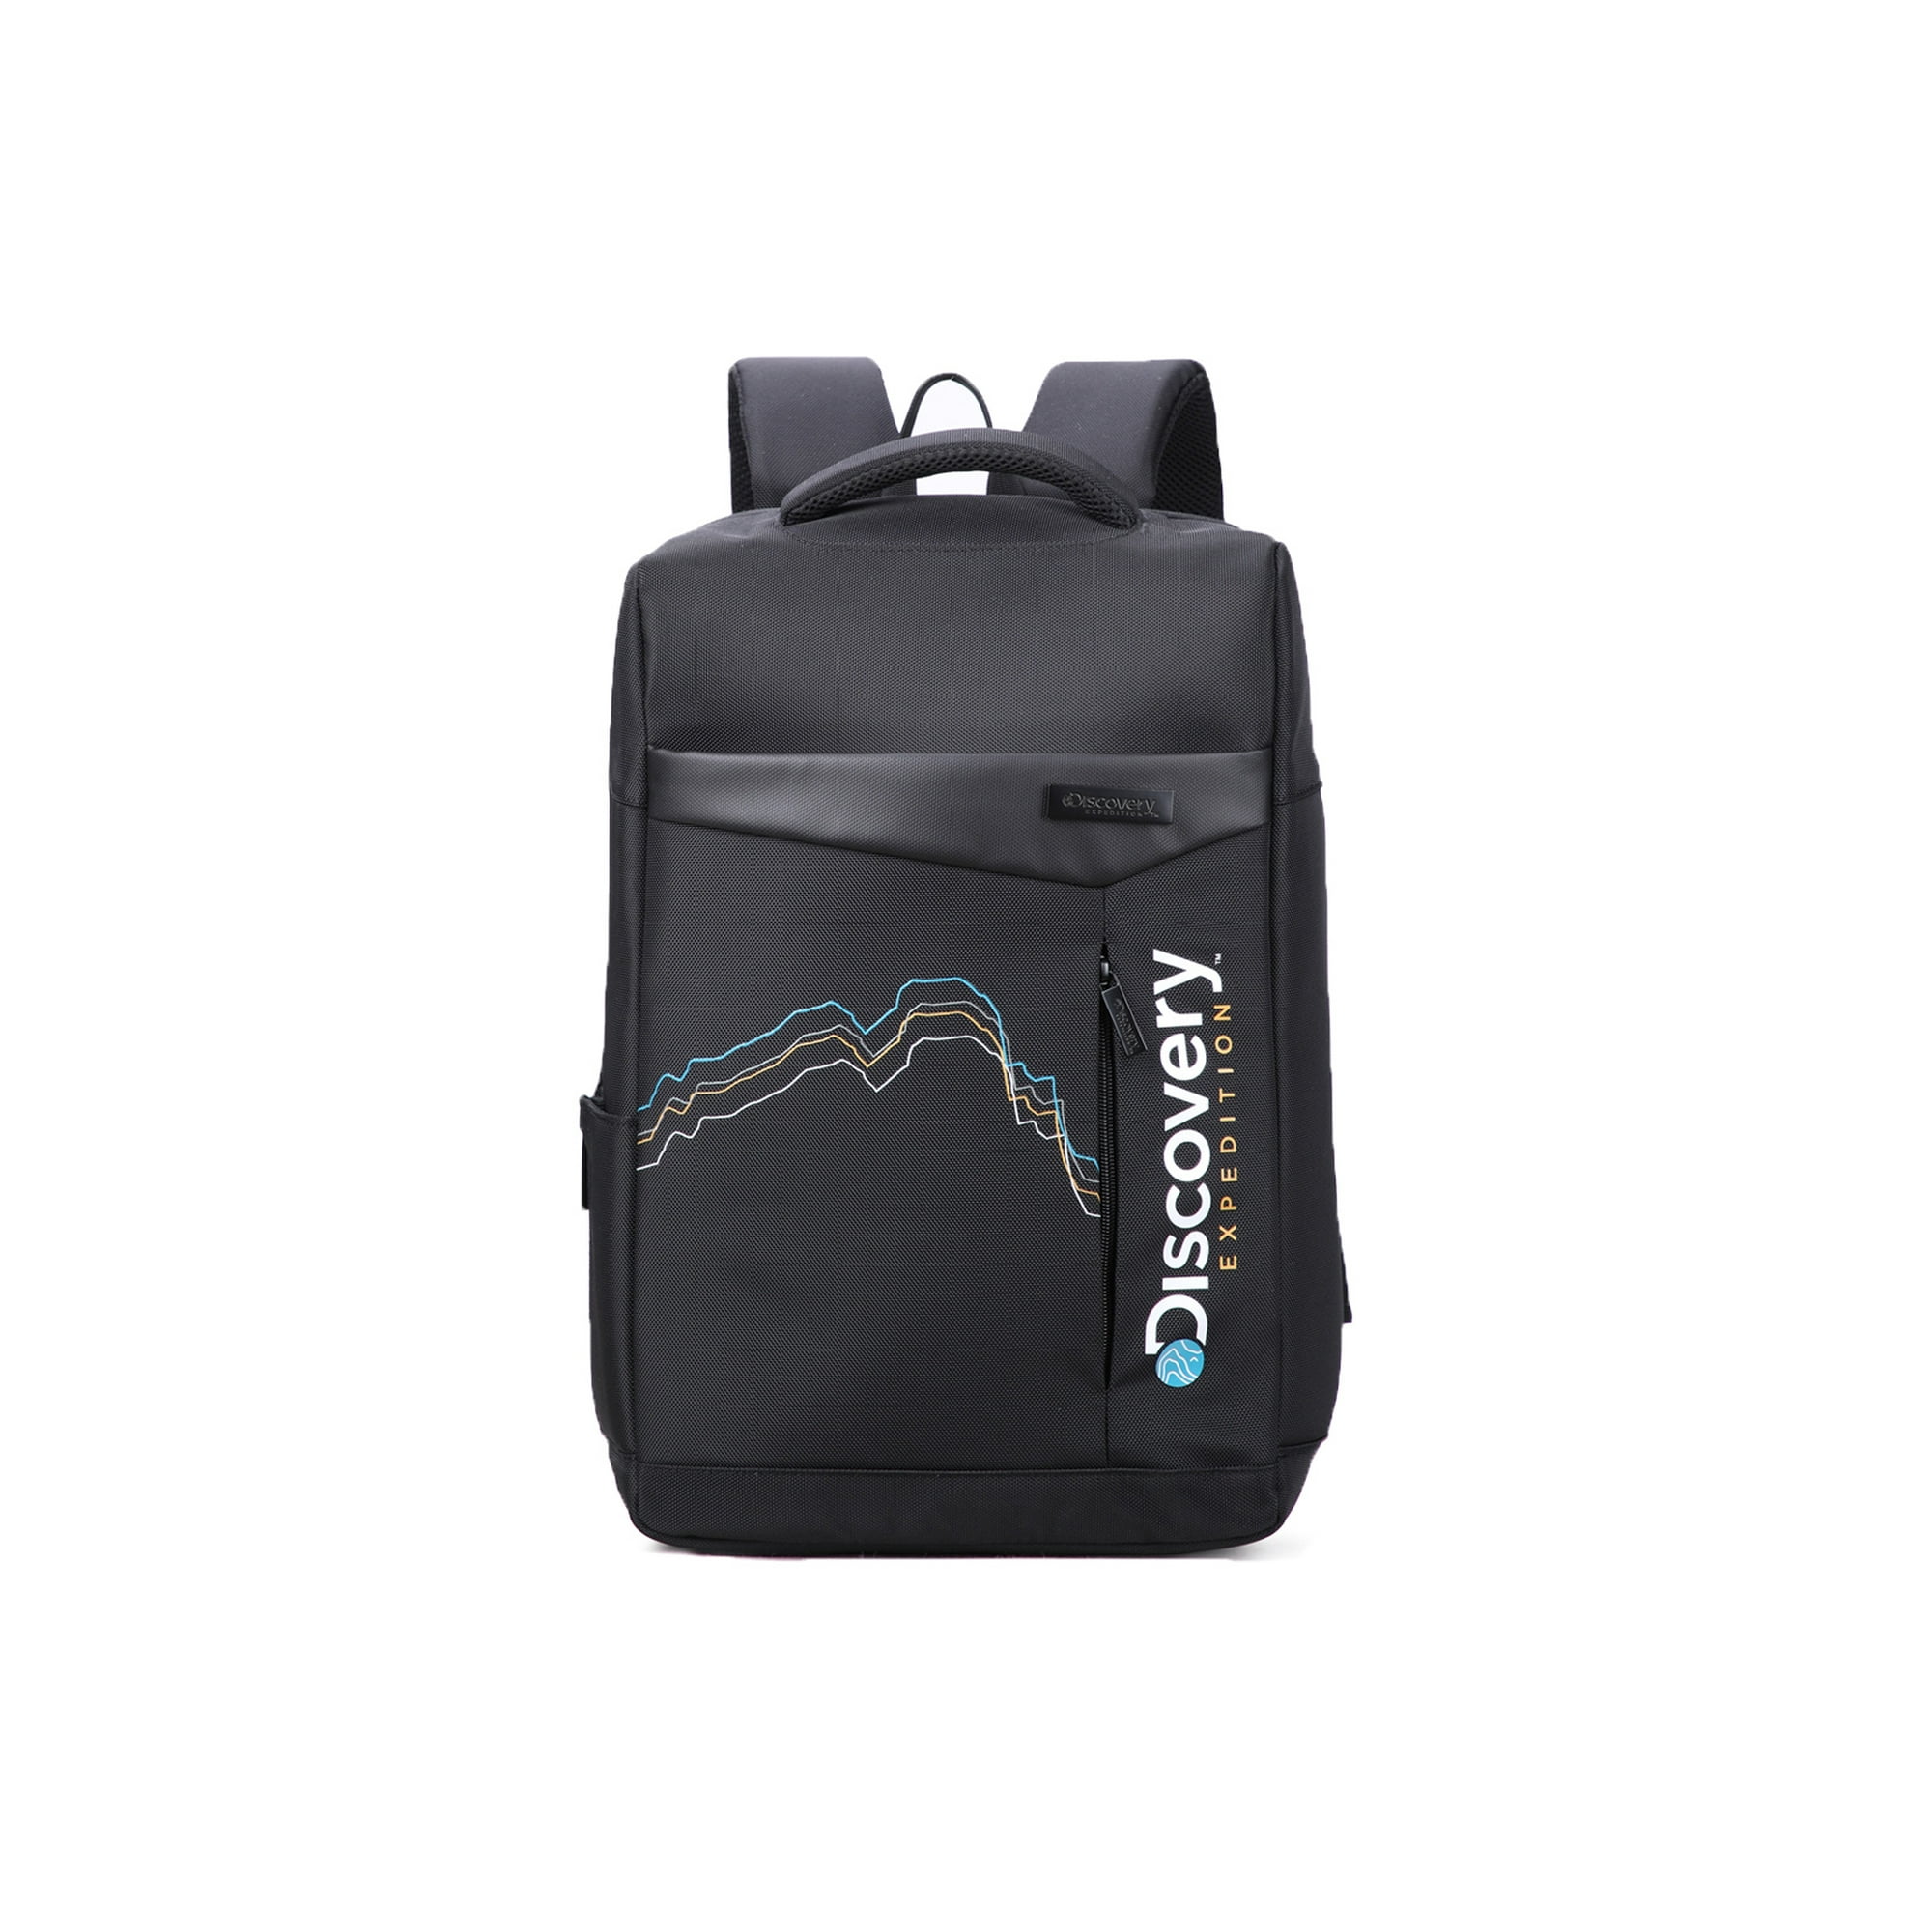 Discovery Expedition Backpack